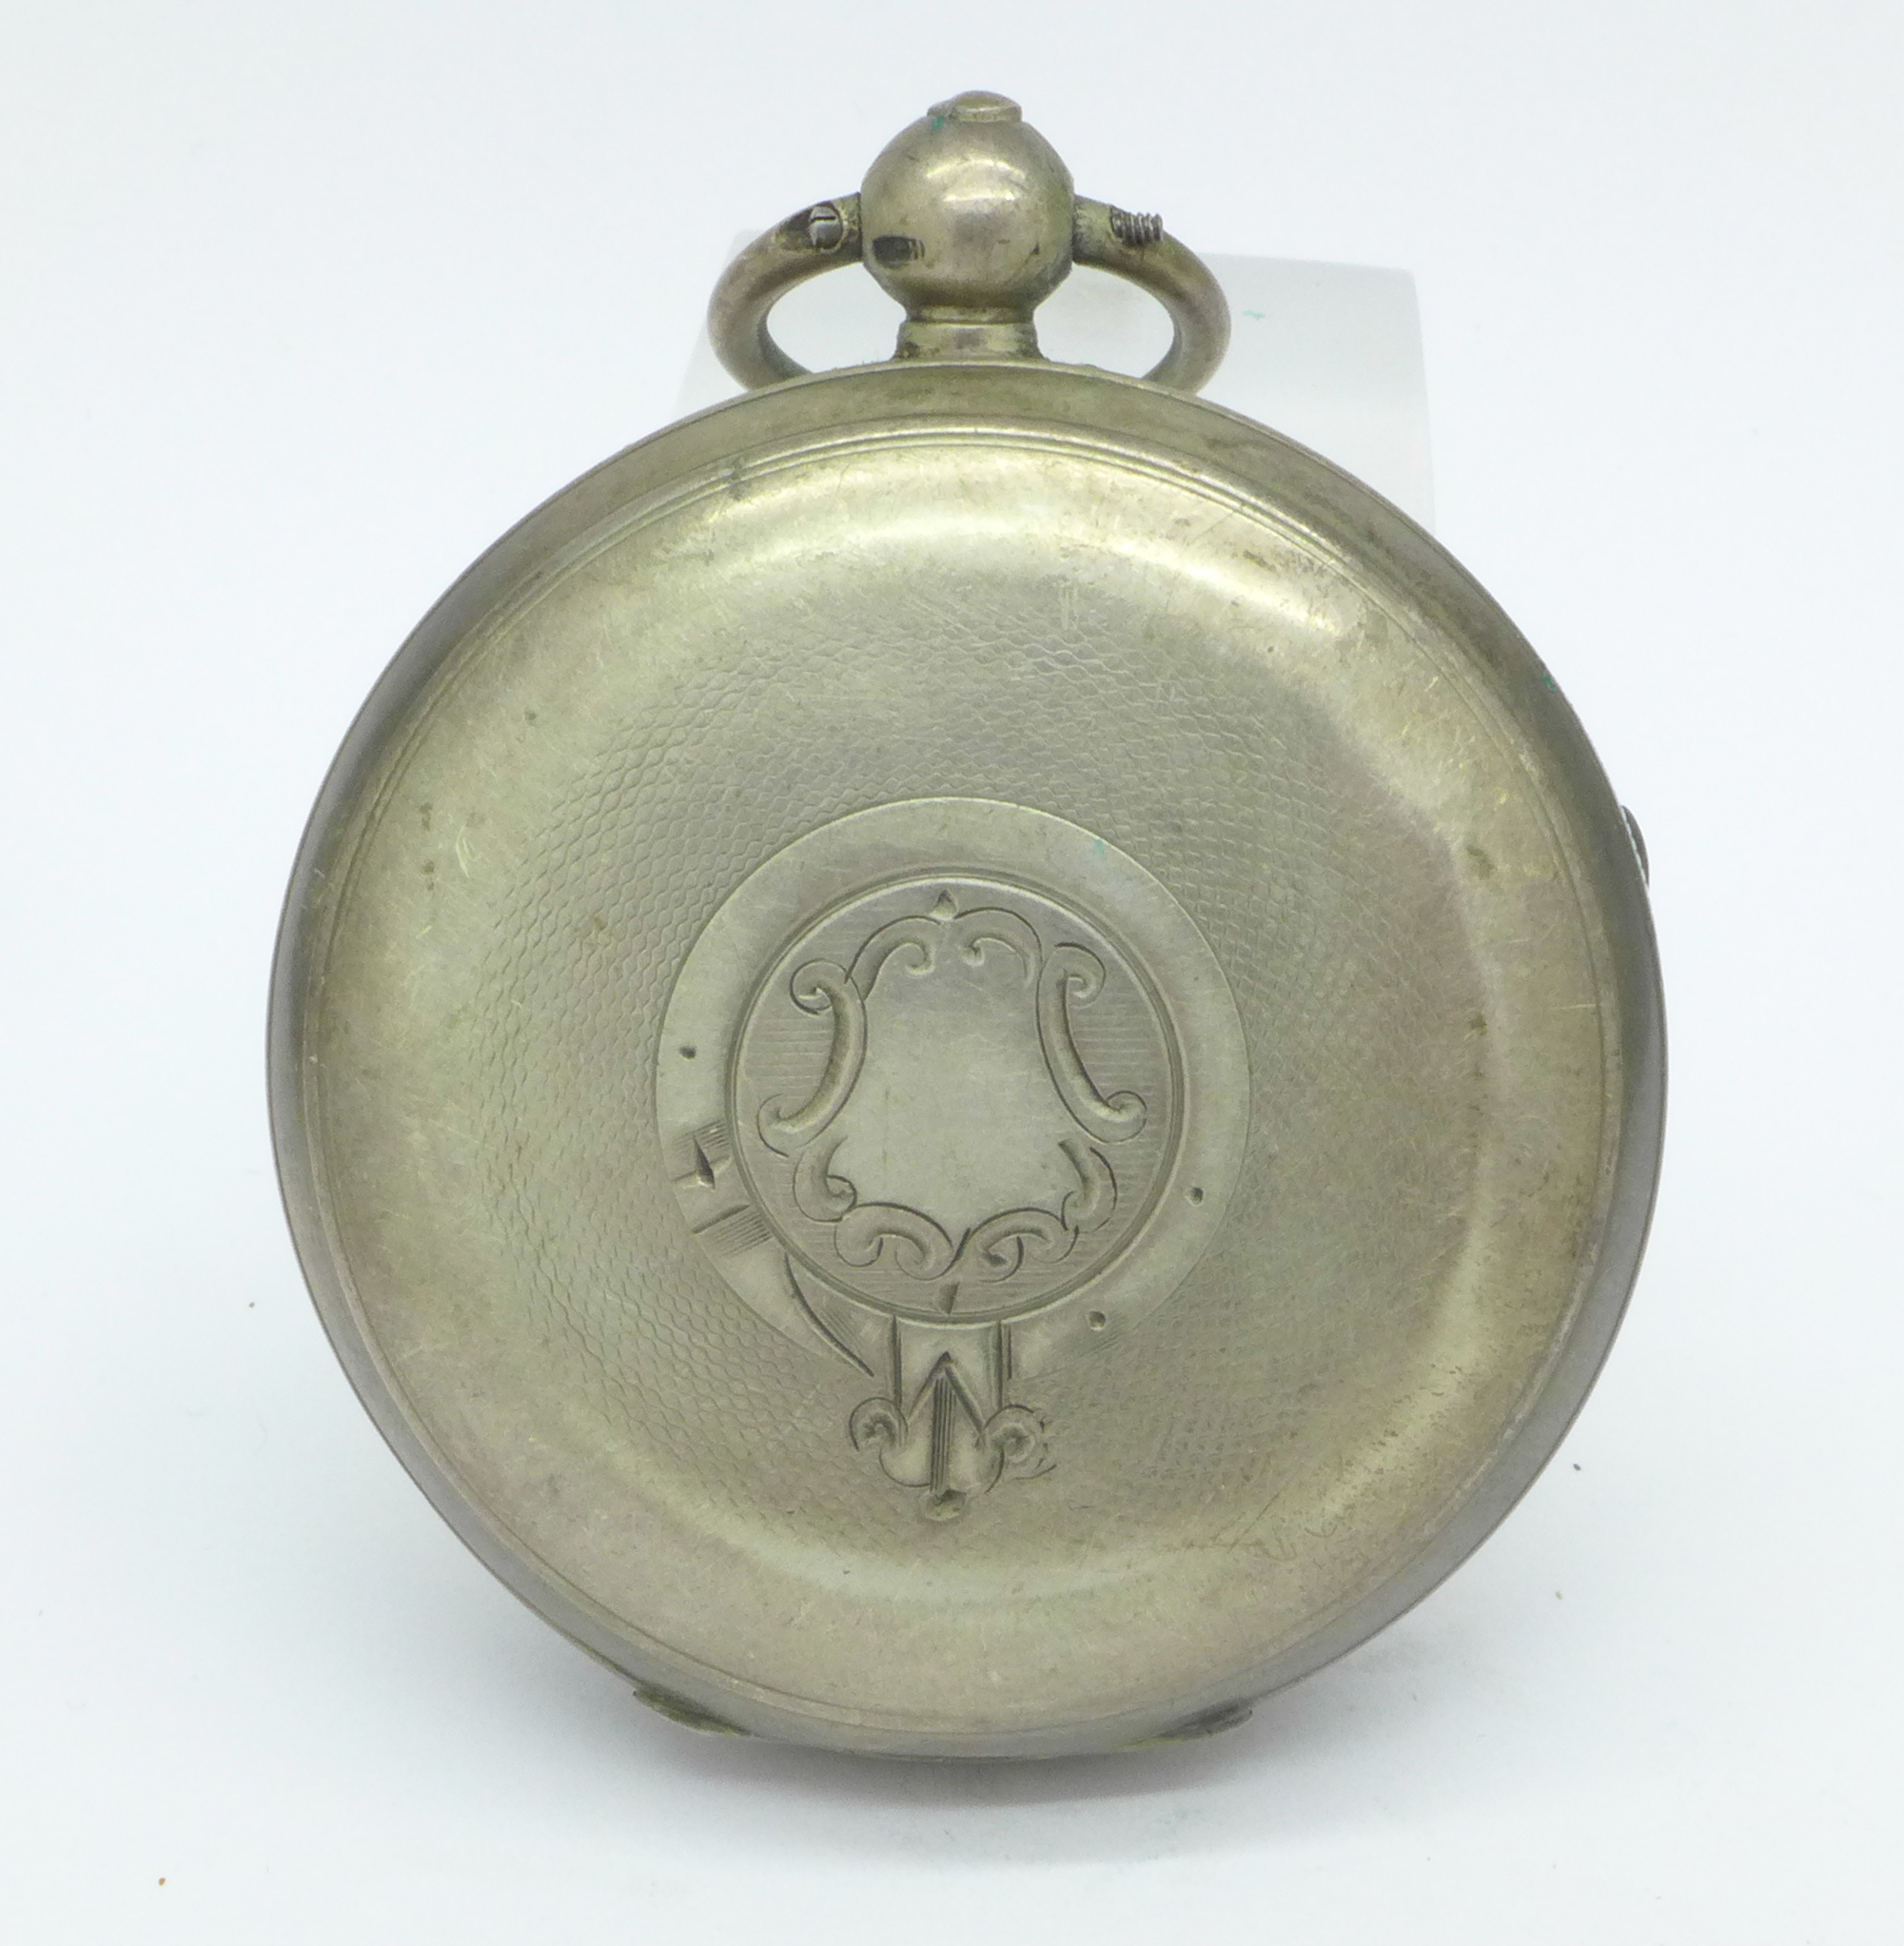 A silver English lever pocket watch, T. Edwards & Co. - Image 2 of 3